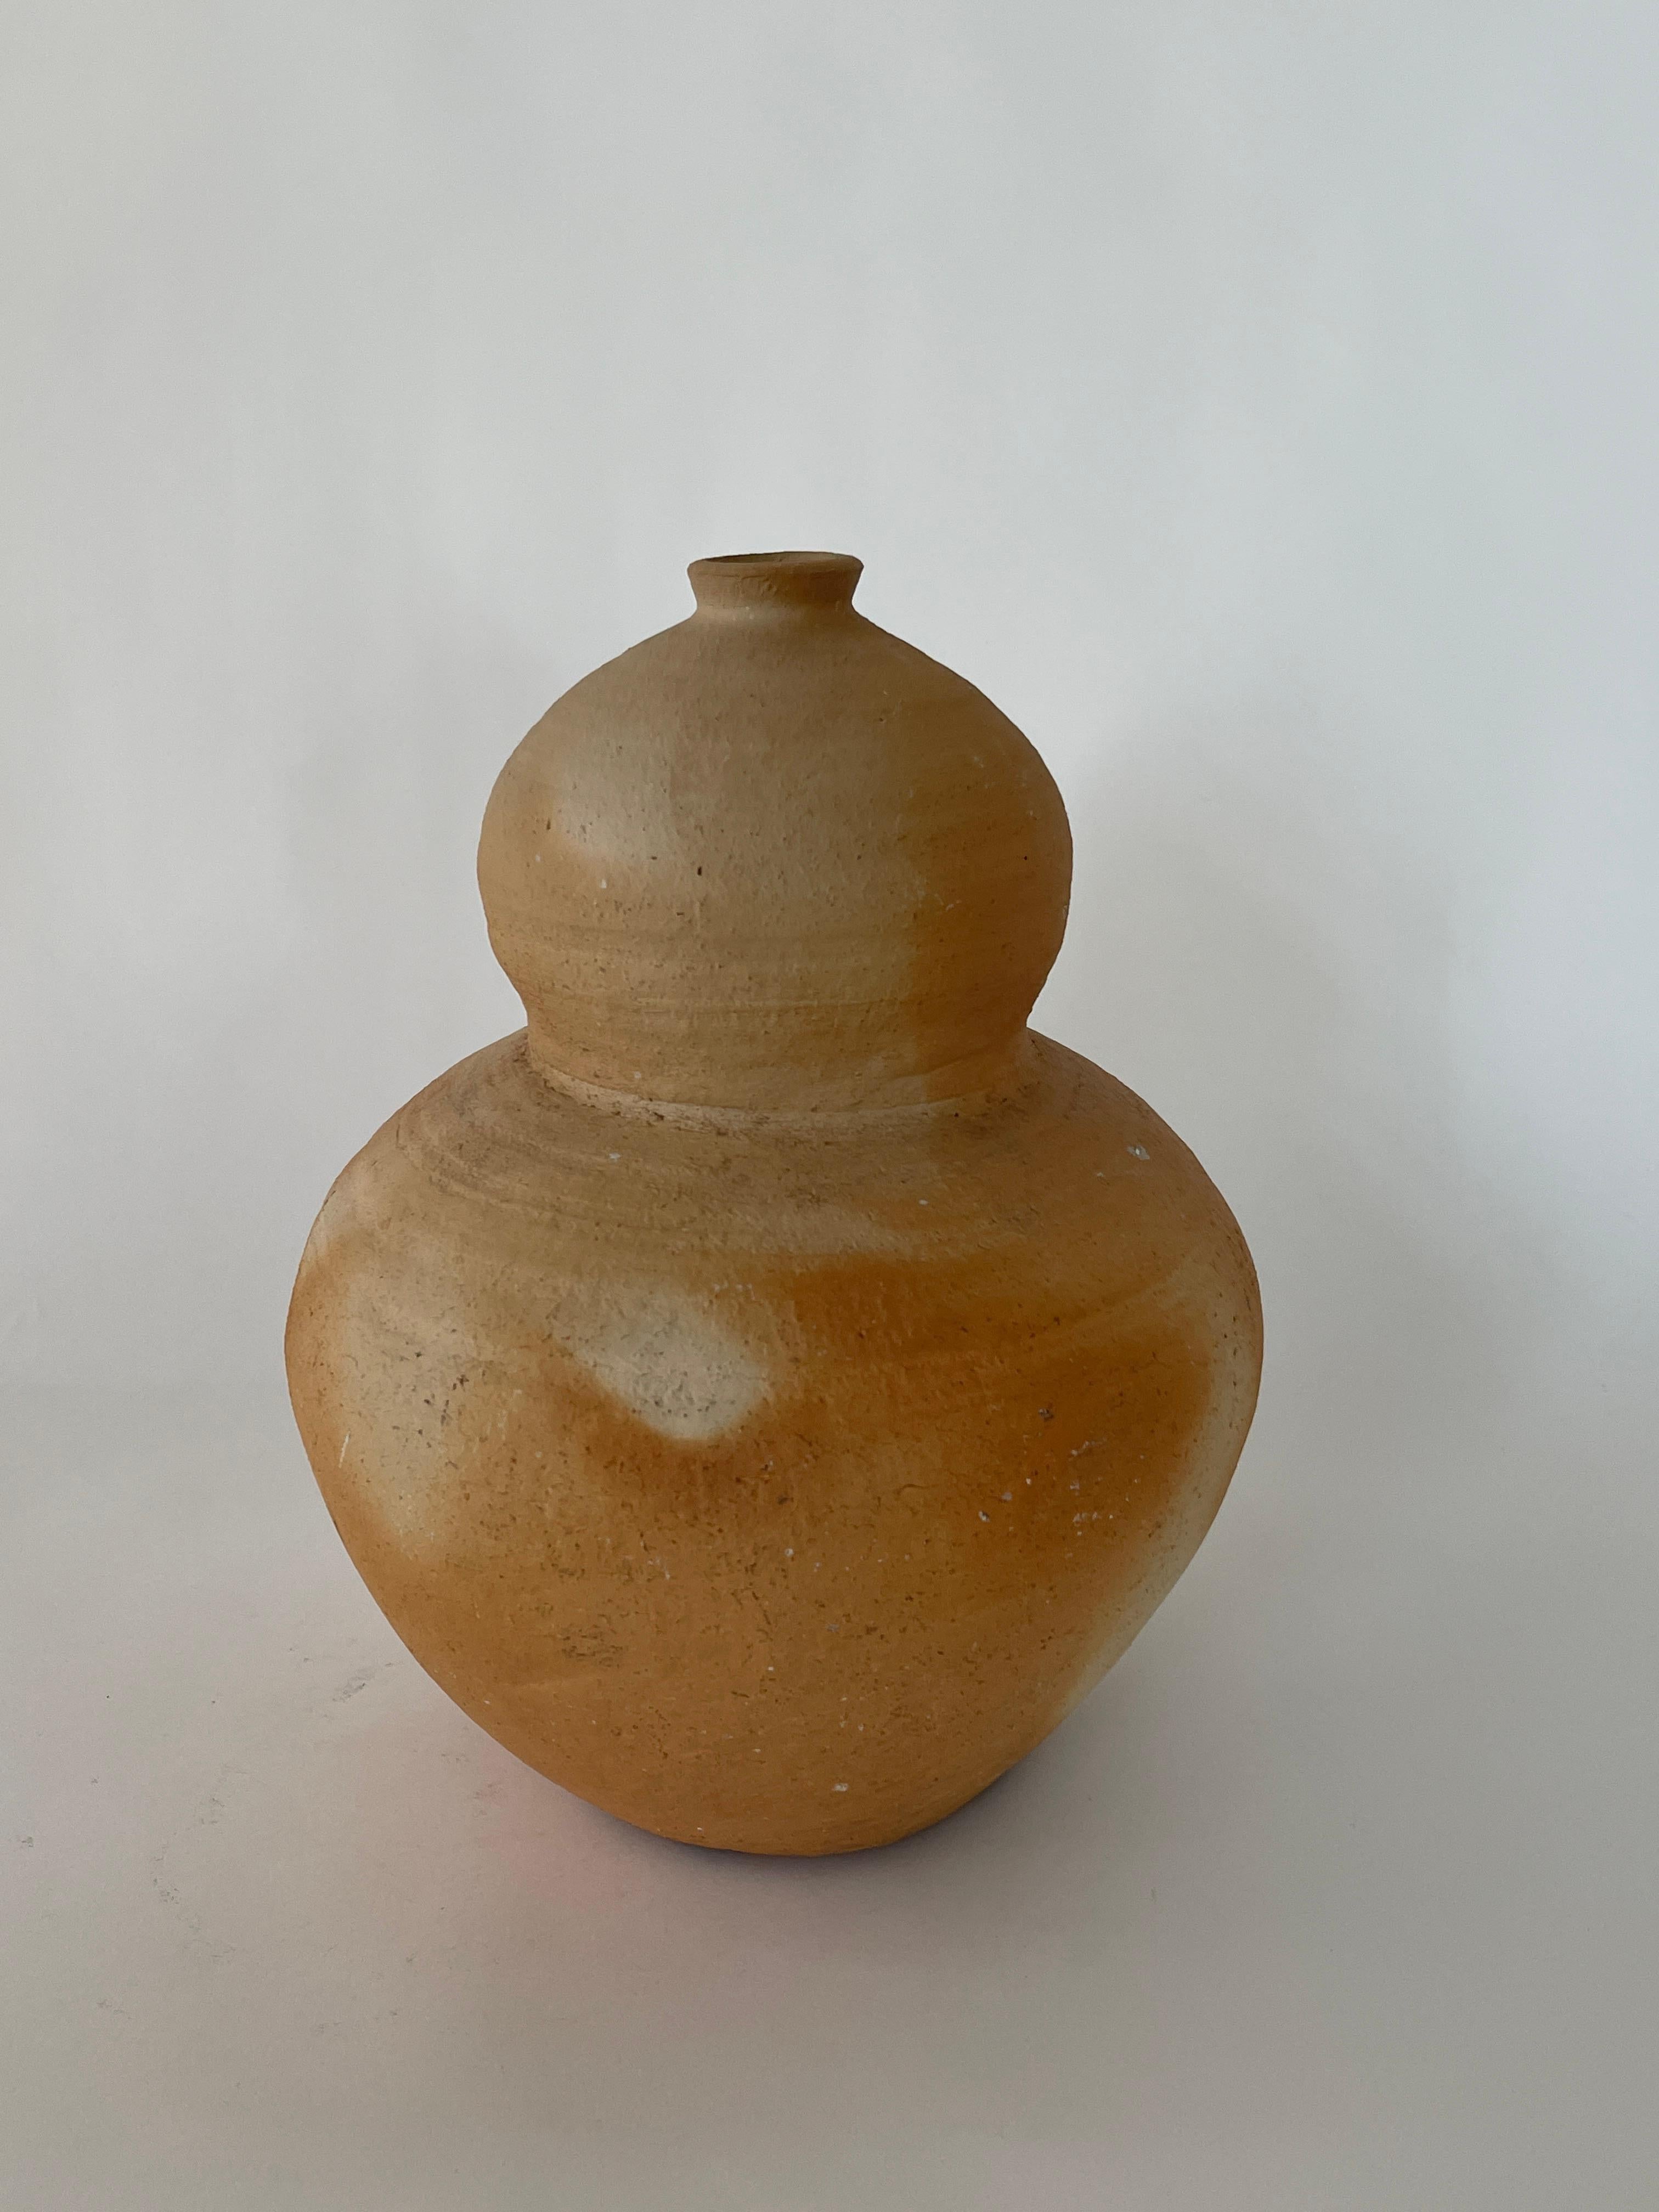 Mid 20th century Bubble Ceramic Vessel in a beautiful natural neutral colorway. Excellently hand crafted with rotational marks from the spinning technique.

Dimensions:
9